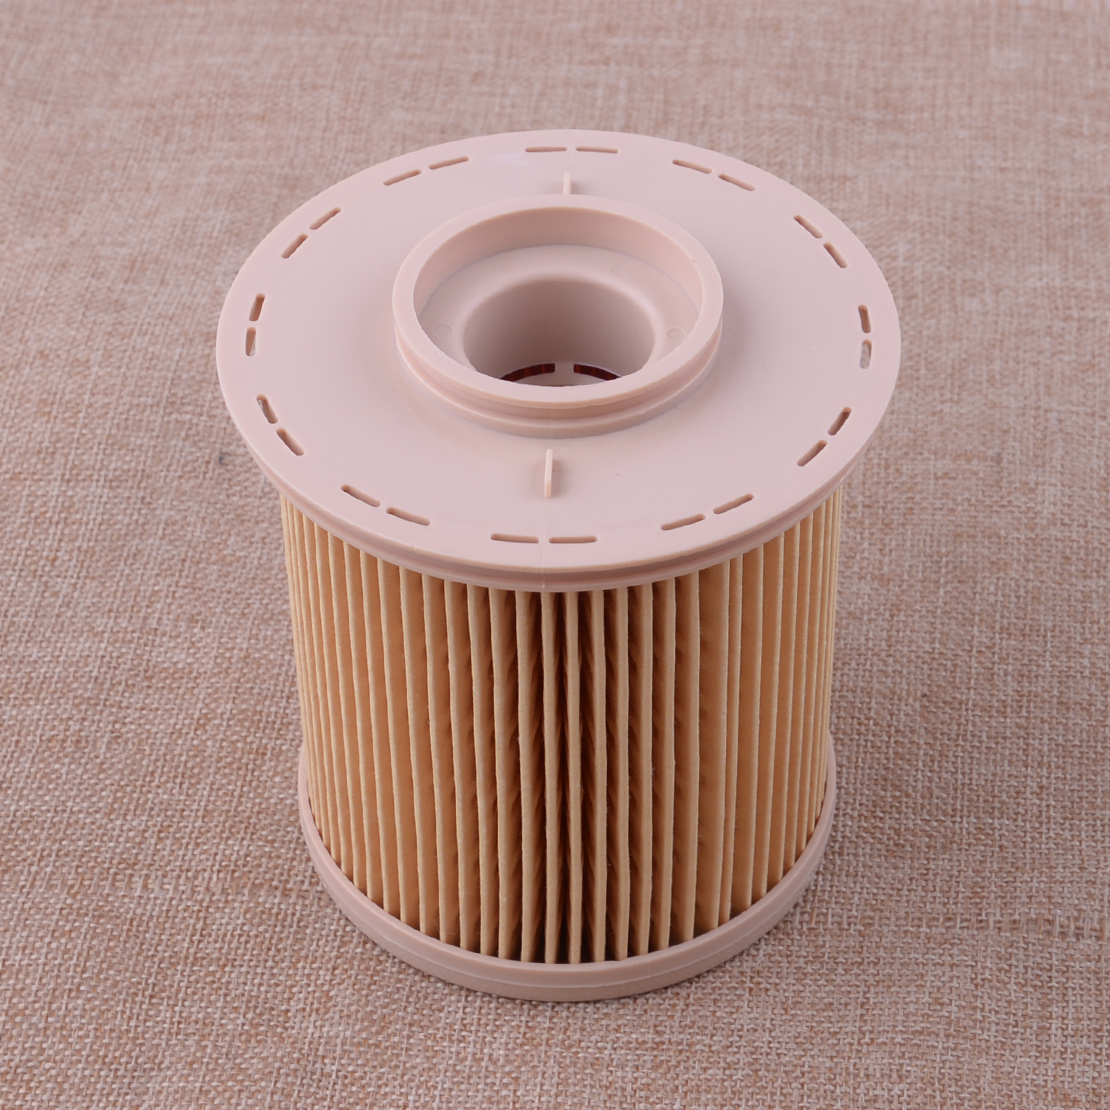 Fuel Filter With O-Rings Fit For Dodge Ram 2500 3500 Cummins Engine 97 1999 Dodge Cummins Fuel Filter Replacement